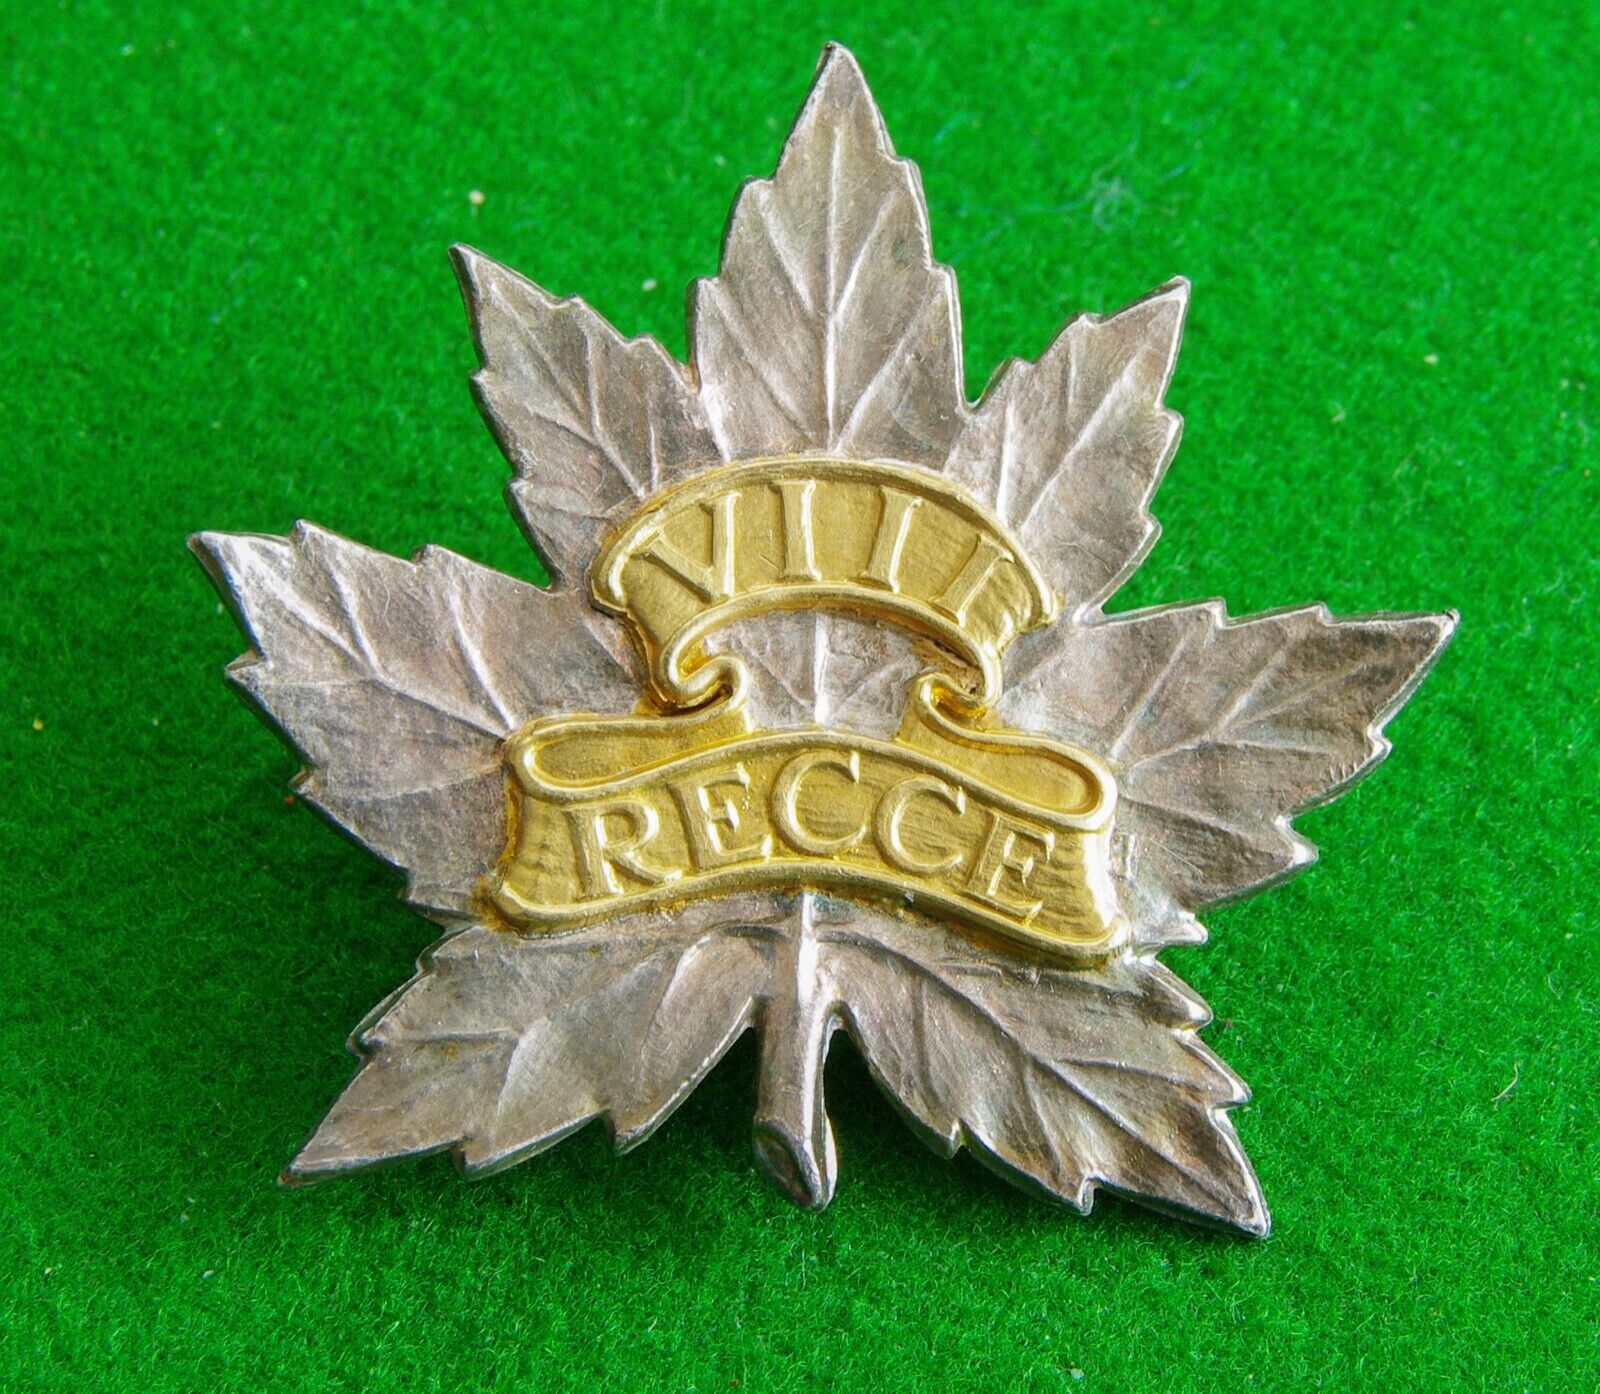 Scarce VIII One Piece Early Recce Canadian Cap Badge - Tests as Silver